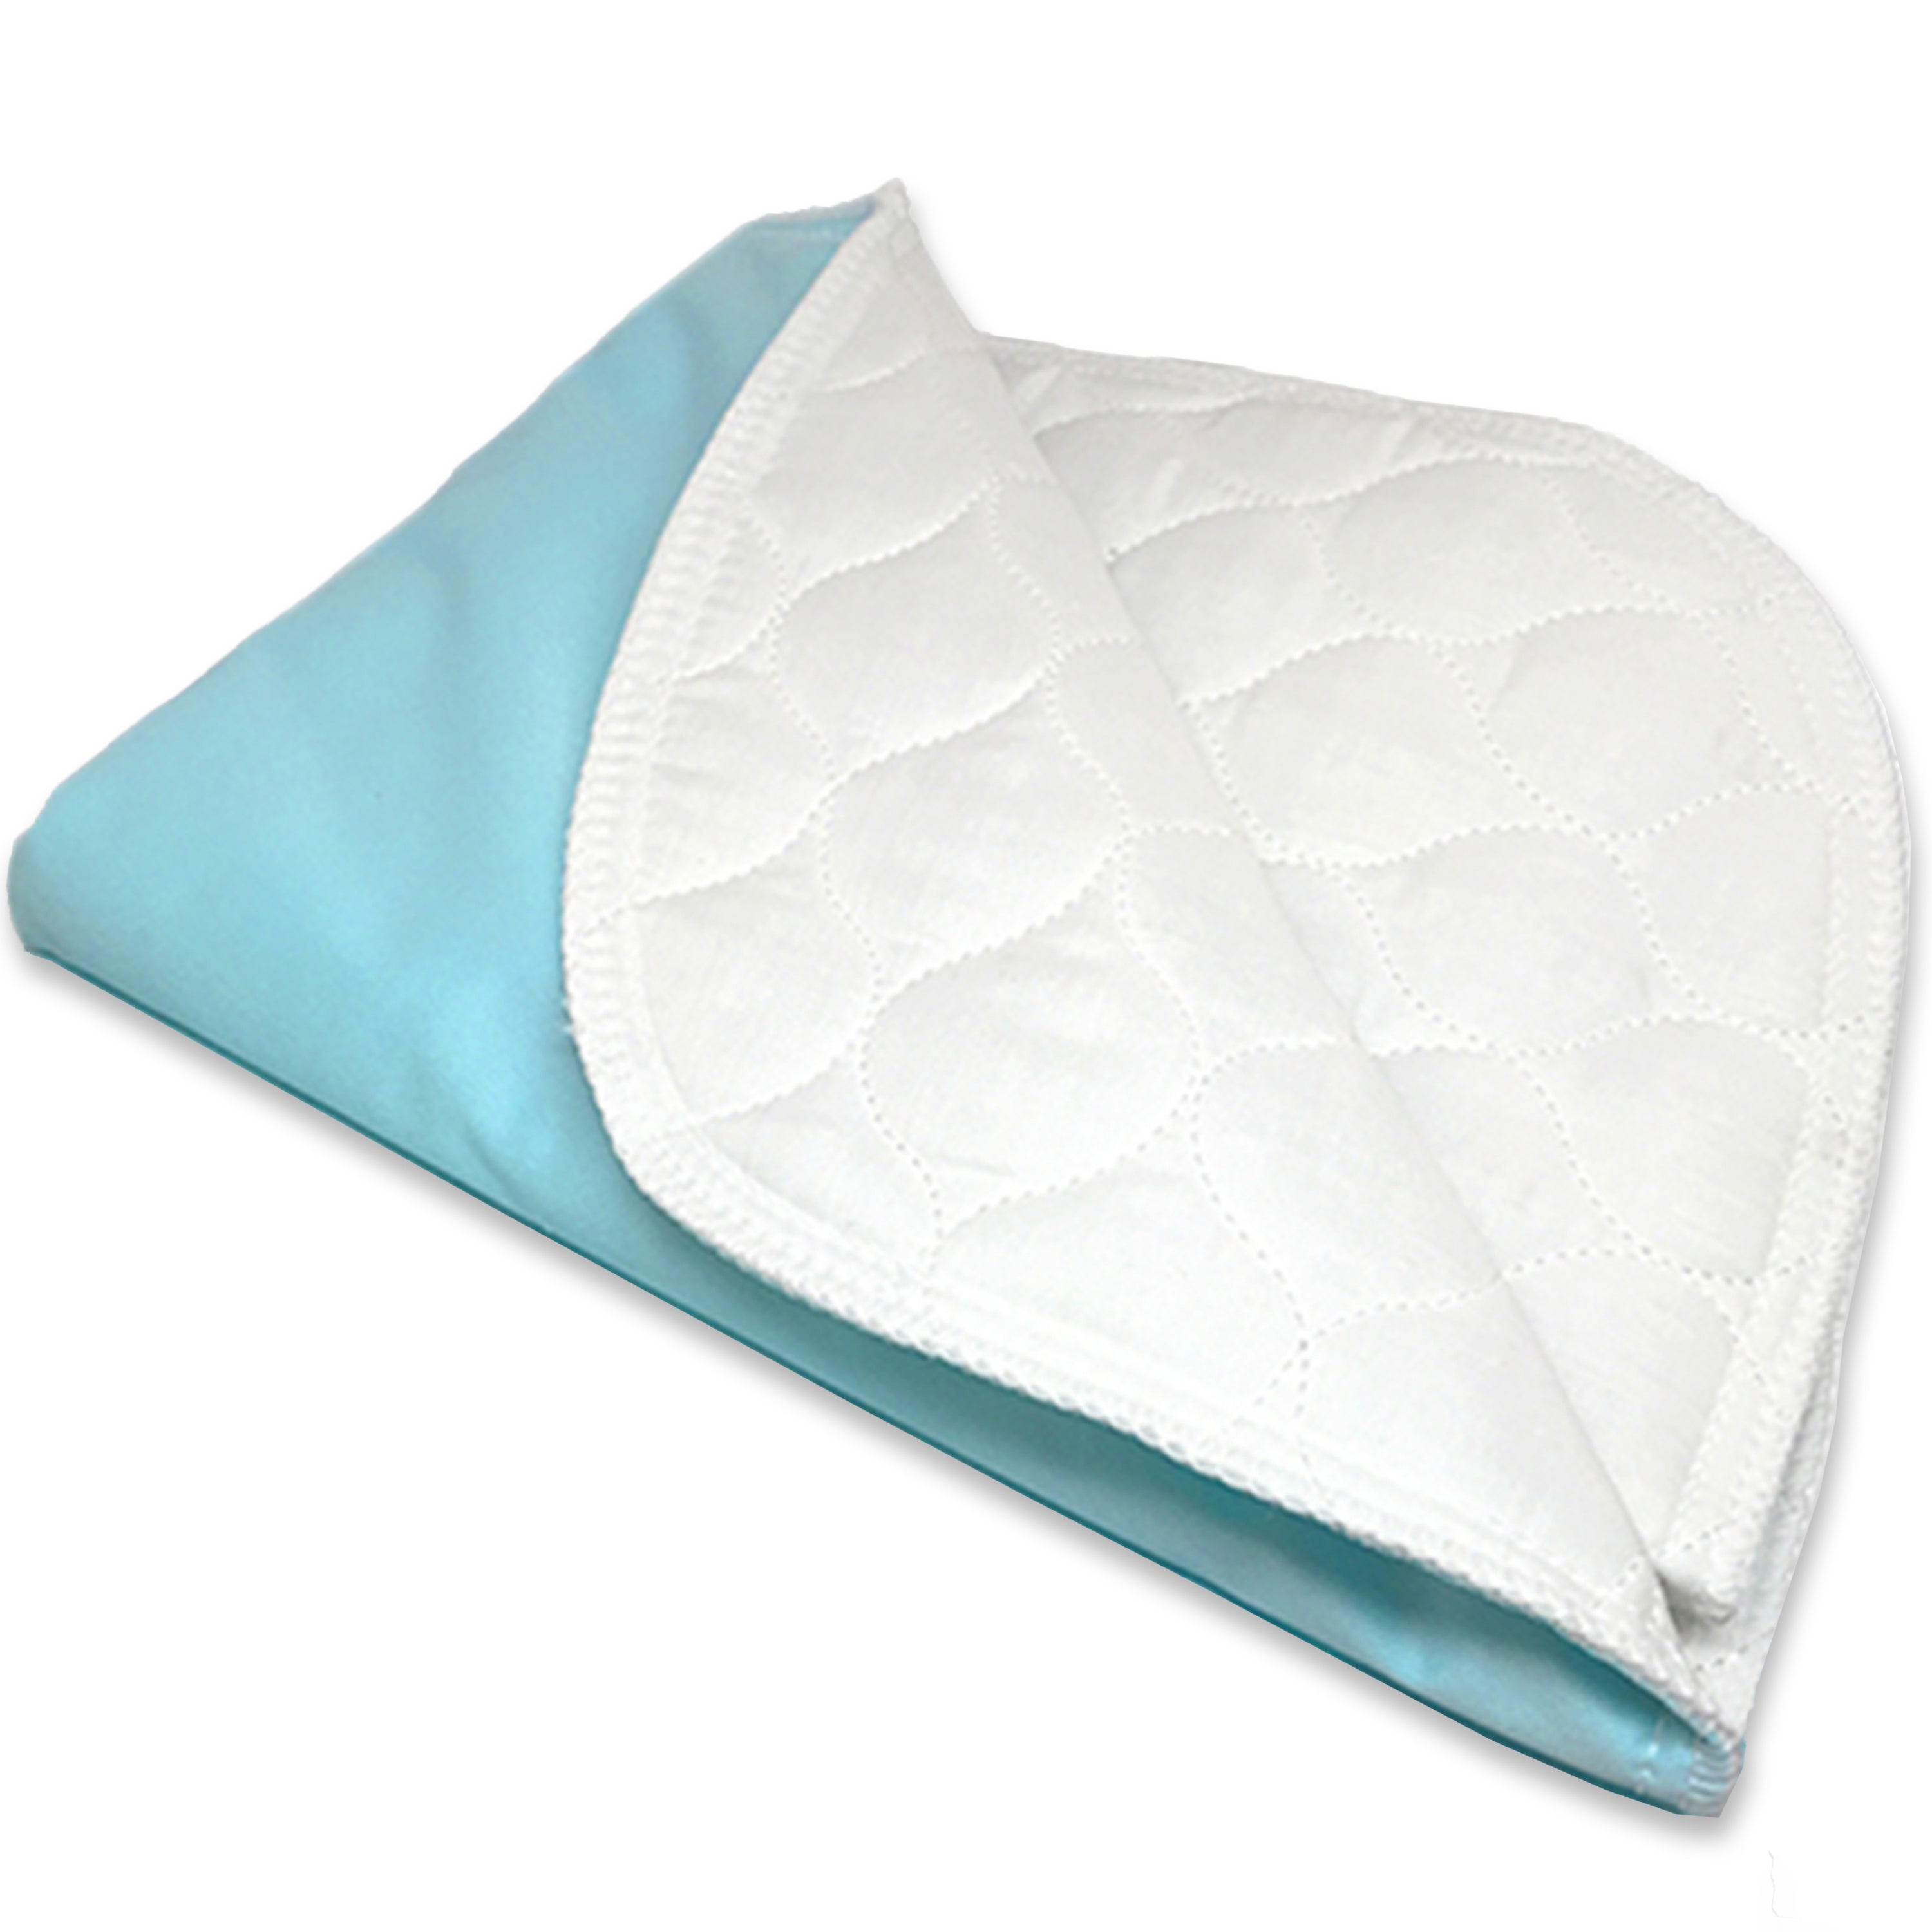 RMS Ultra Soft 4-Layer Washable and Reusable Incontinence Bed Underpads 34X36